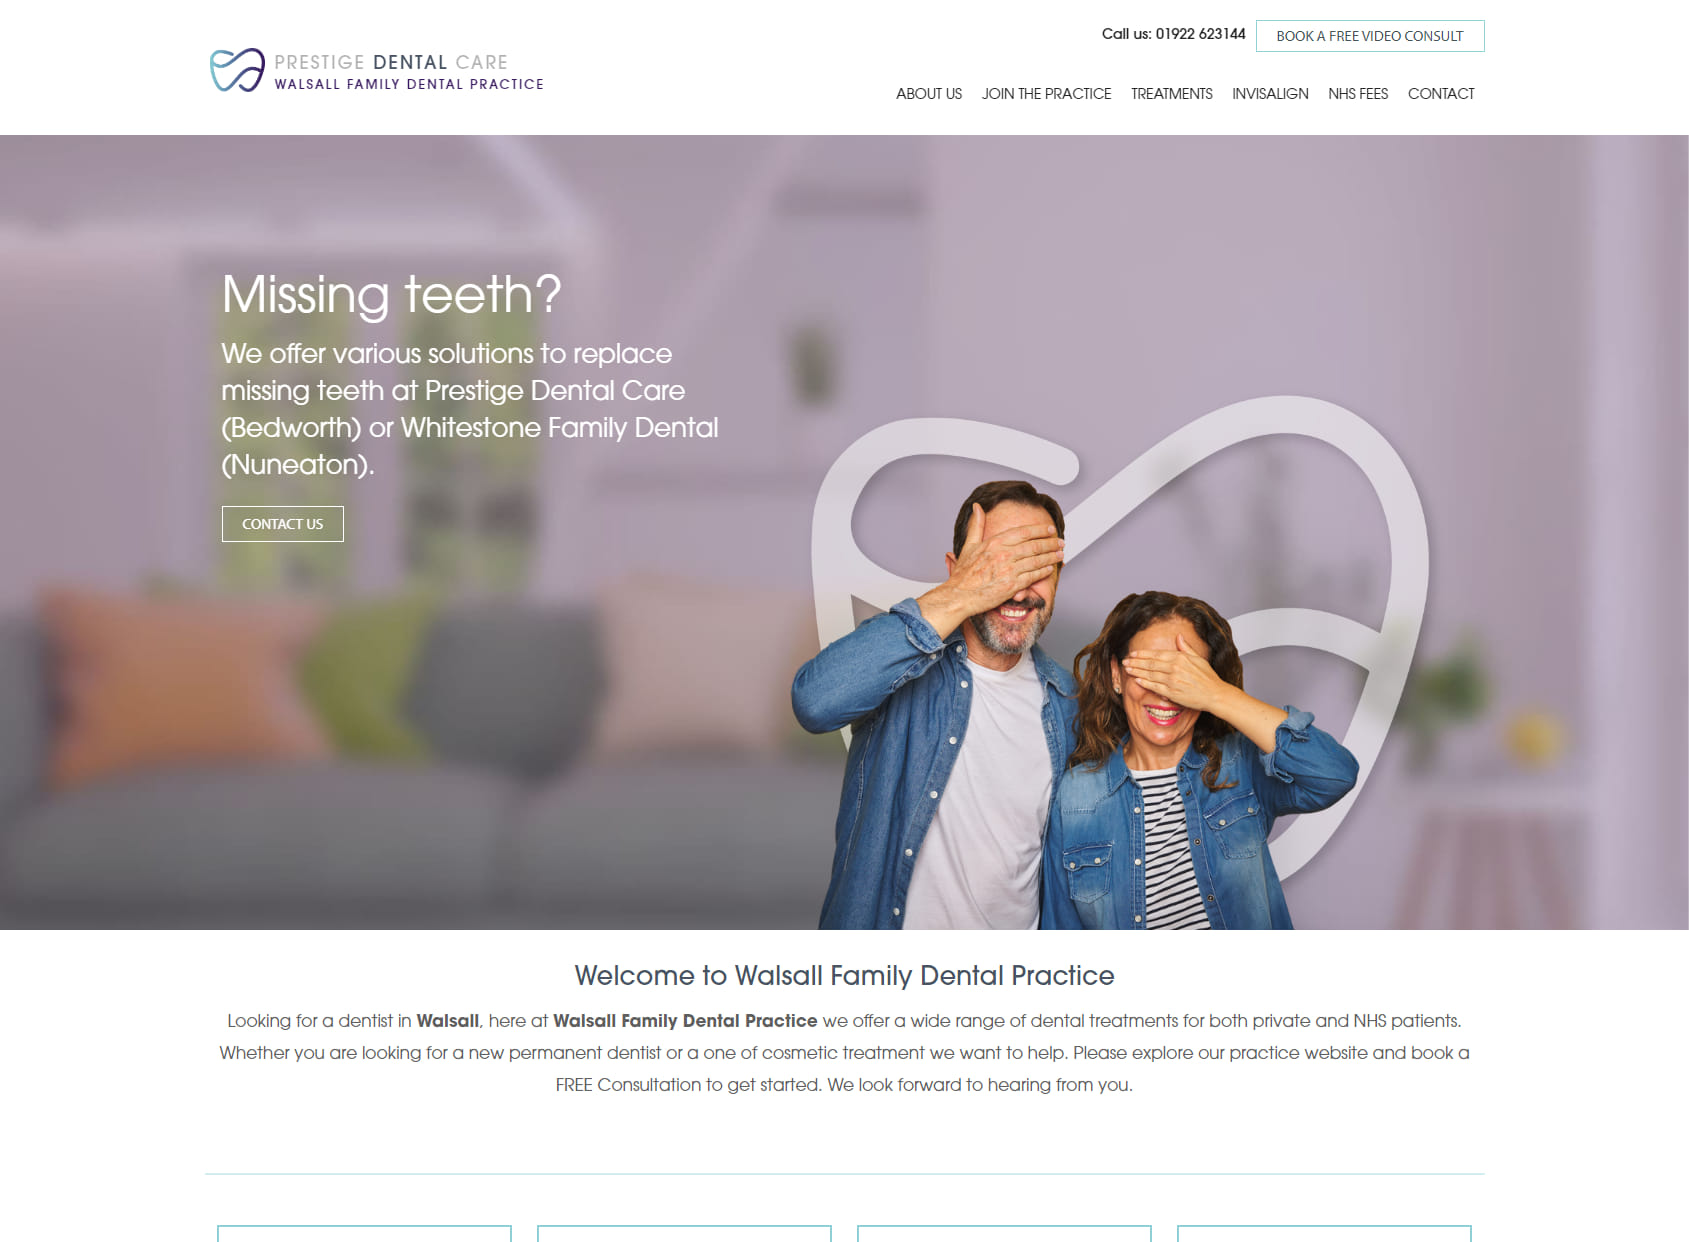 Walsall Family Dental Practice